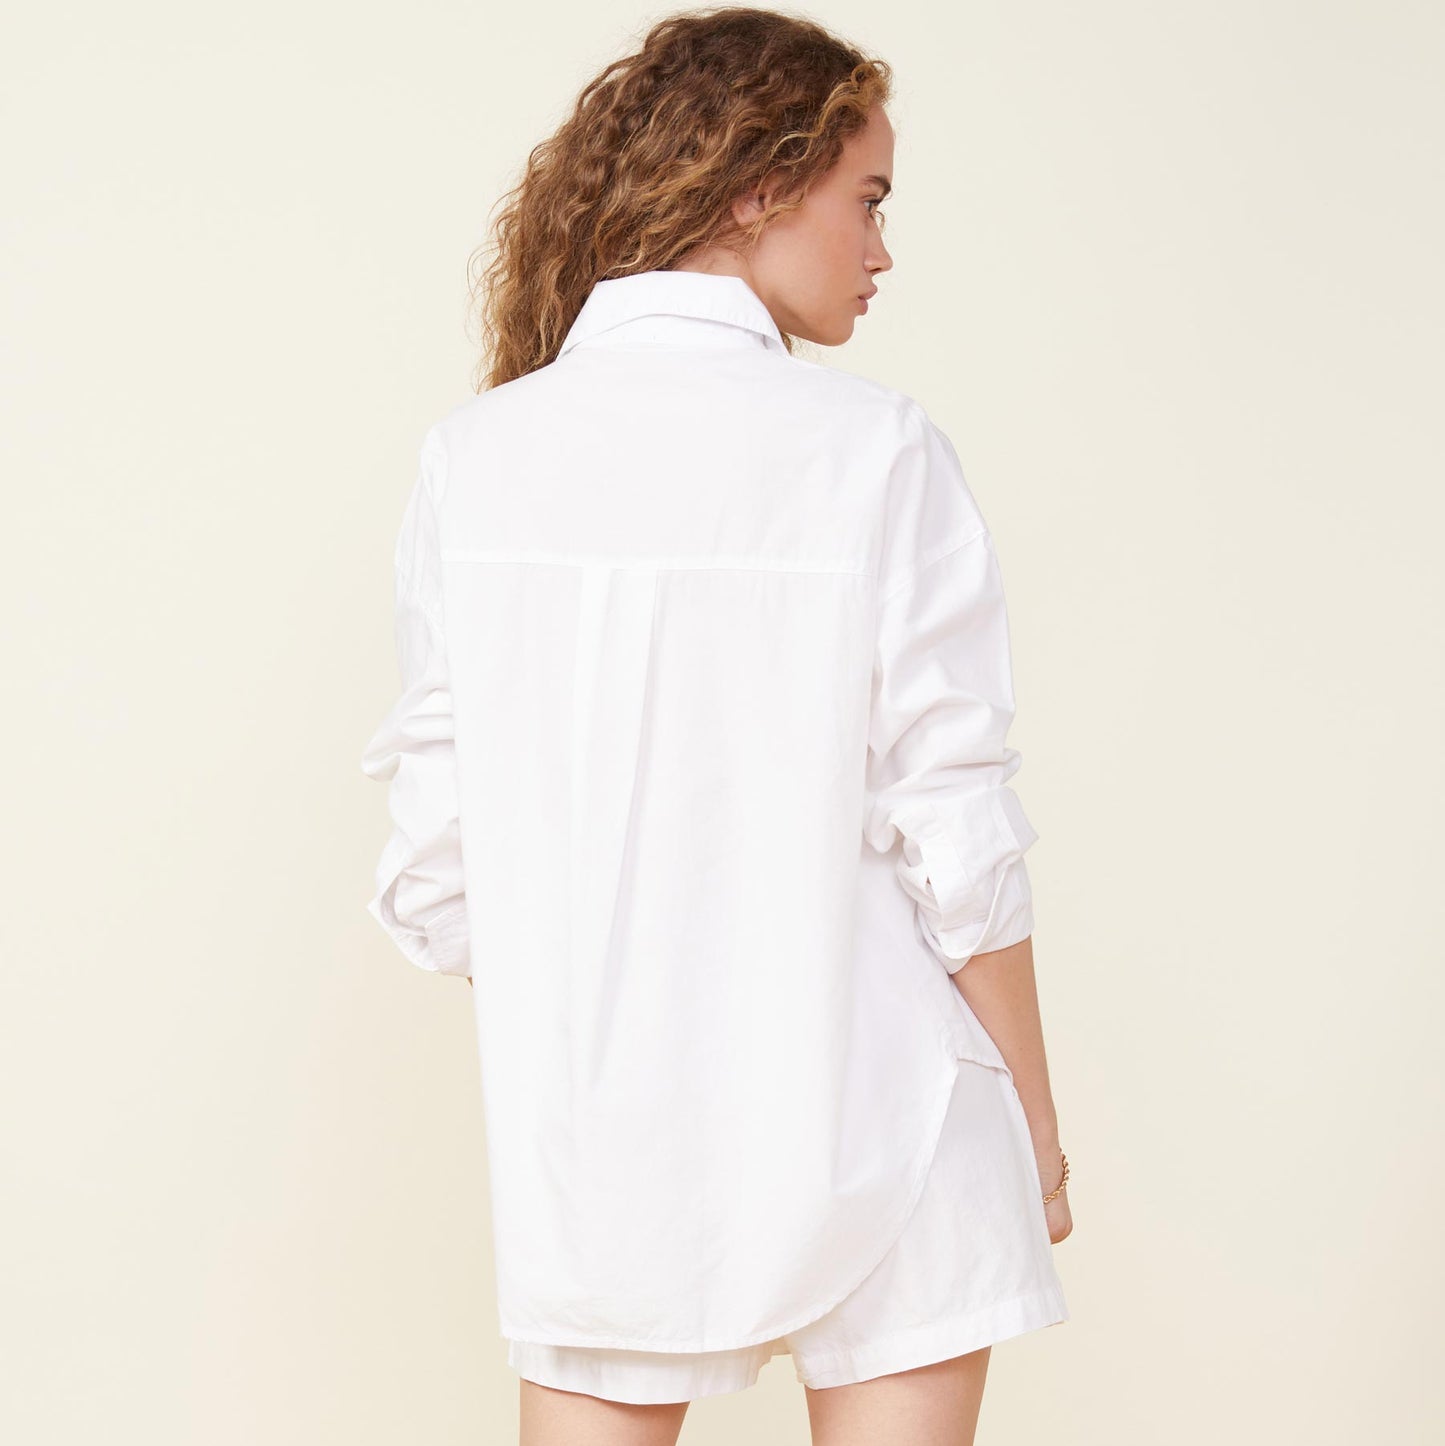 Back view of model wearing the poplin shirt in white.